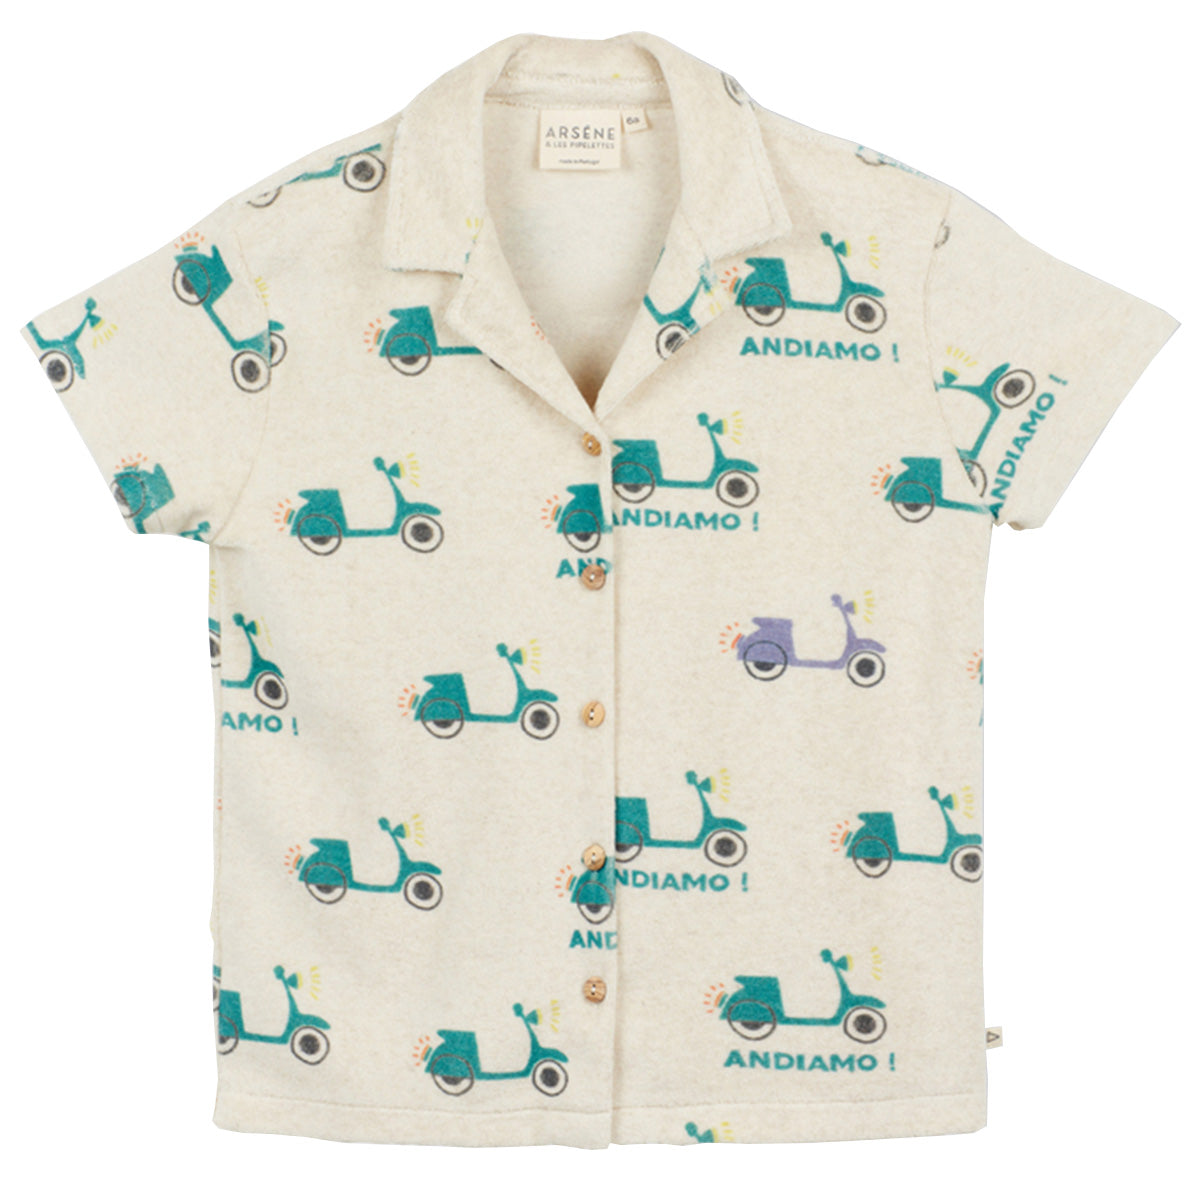 The Scooter Shirt from Arsene et Les Pipelettes. Magnum shirt in exclusive scooters printed terrycloth